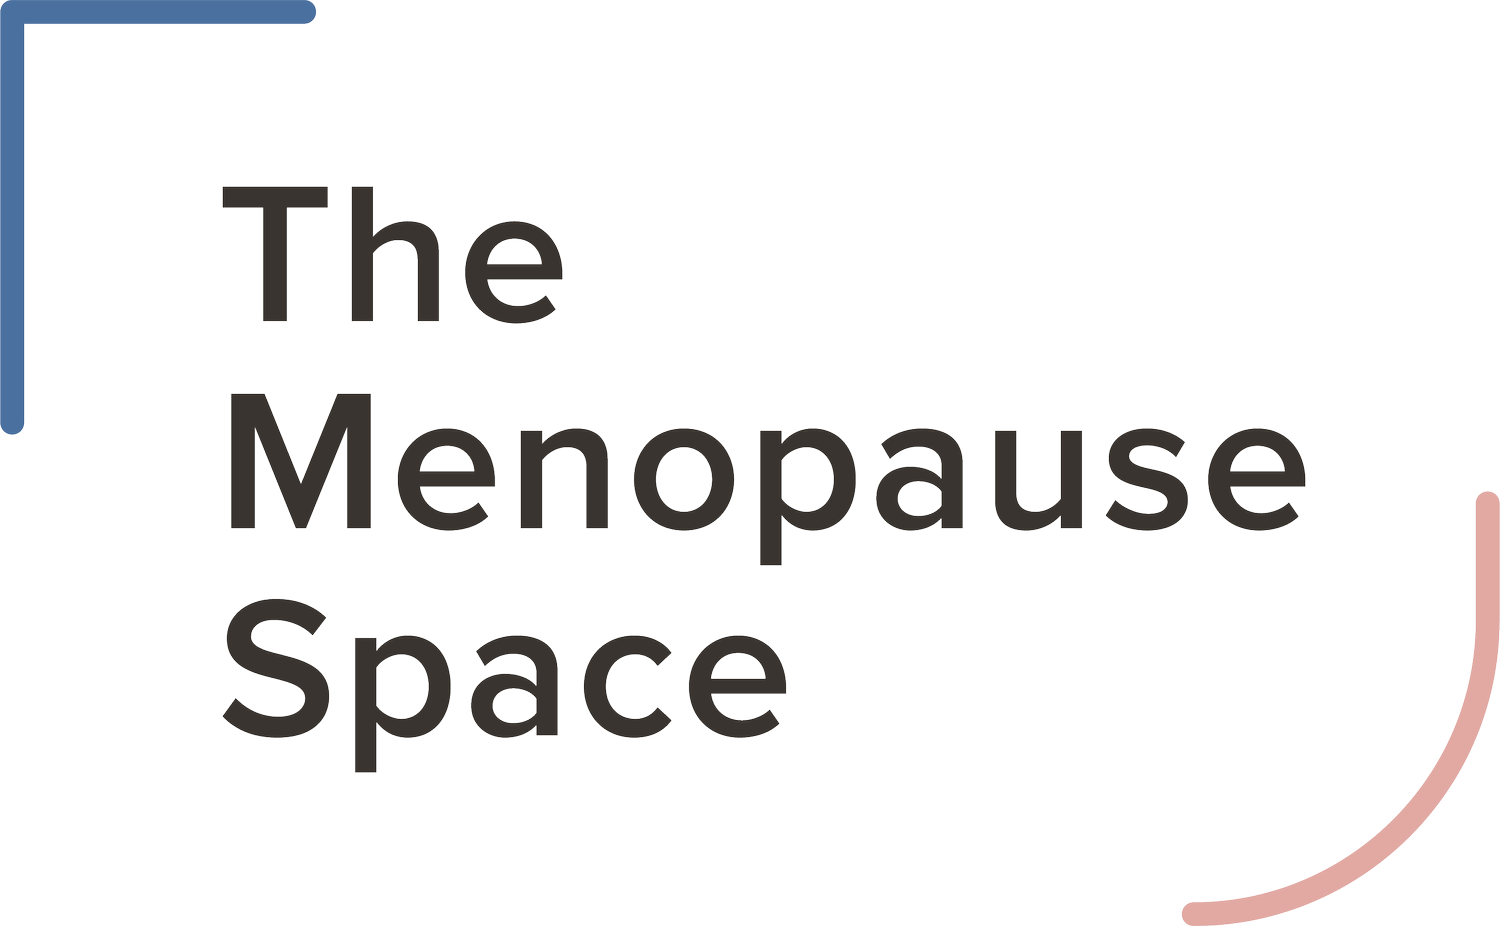 The Menopause Space